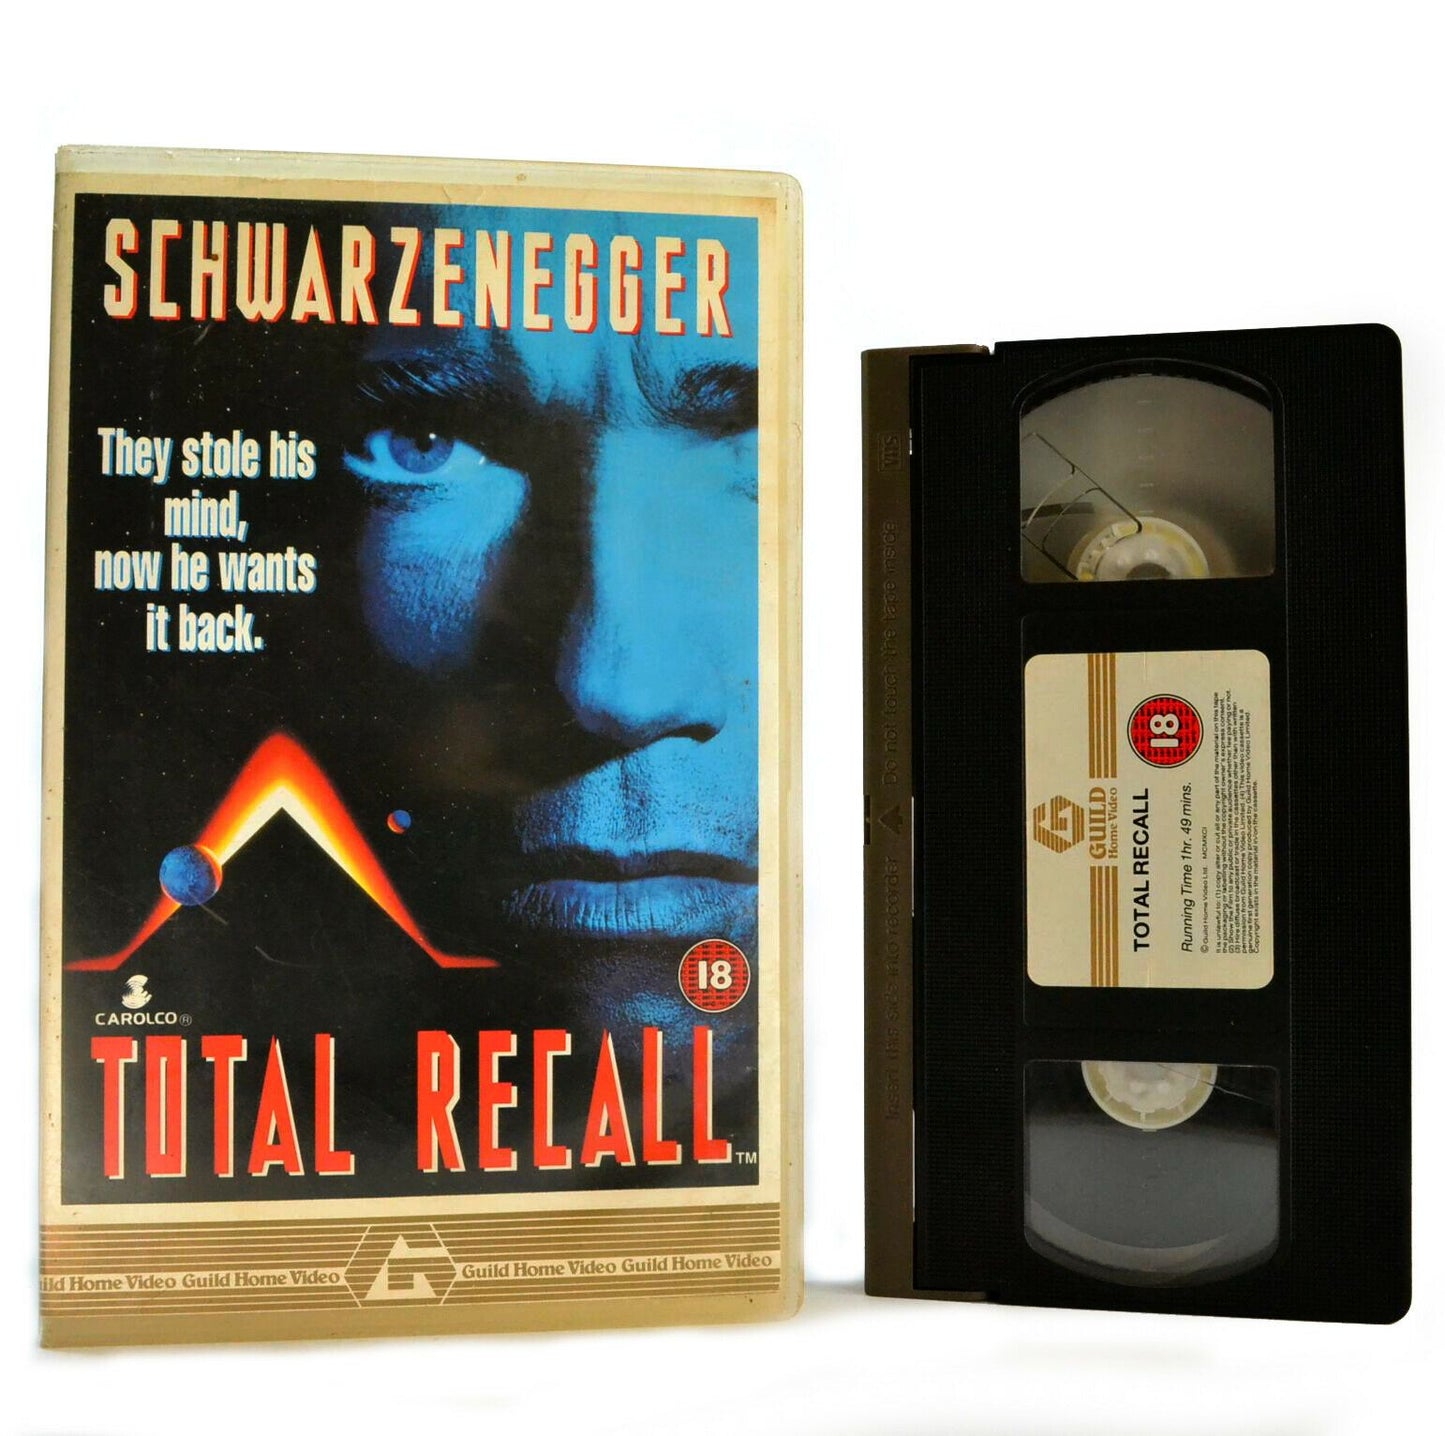 Total Recall: Based On P.K.Dick Short Story - Sci-Fi (1990) - Large Box - VHS-